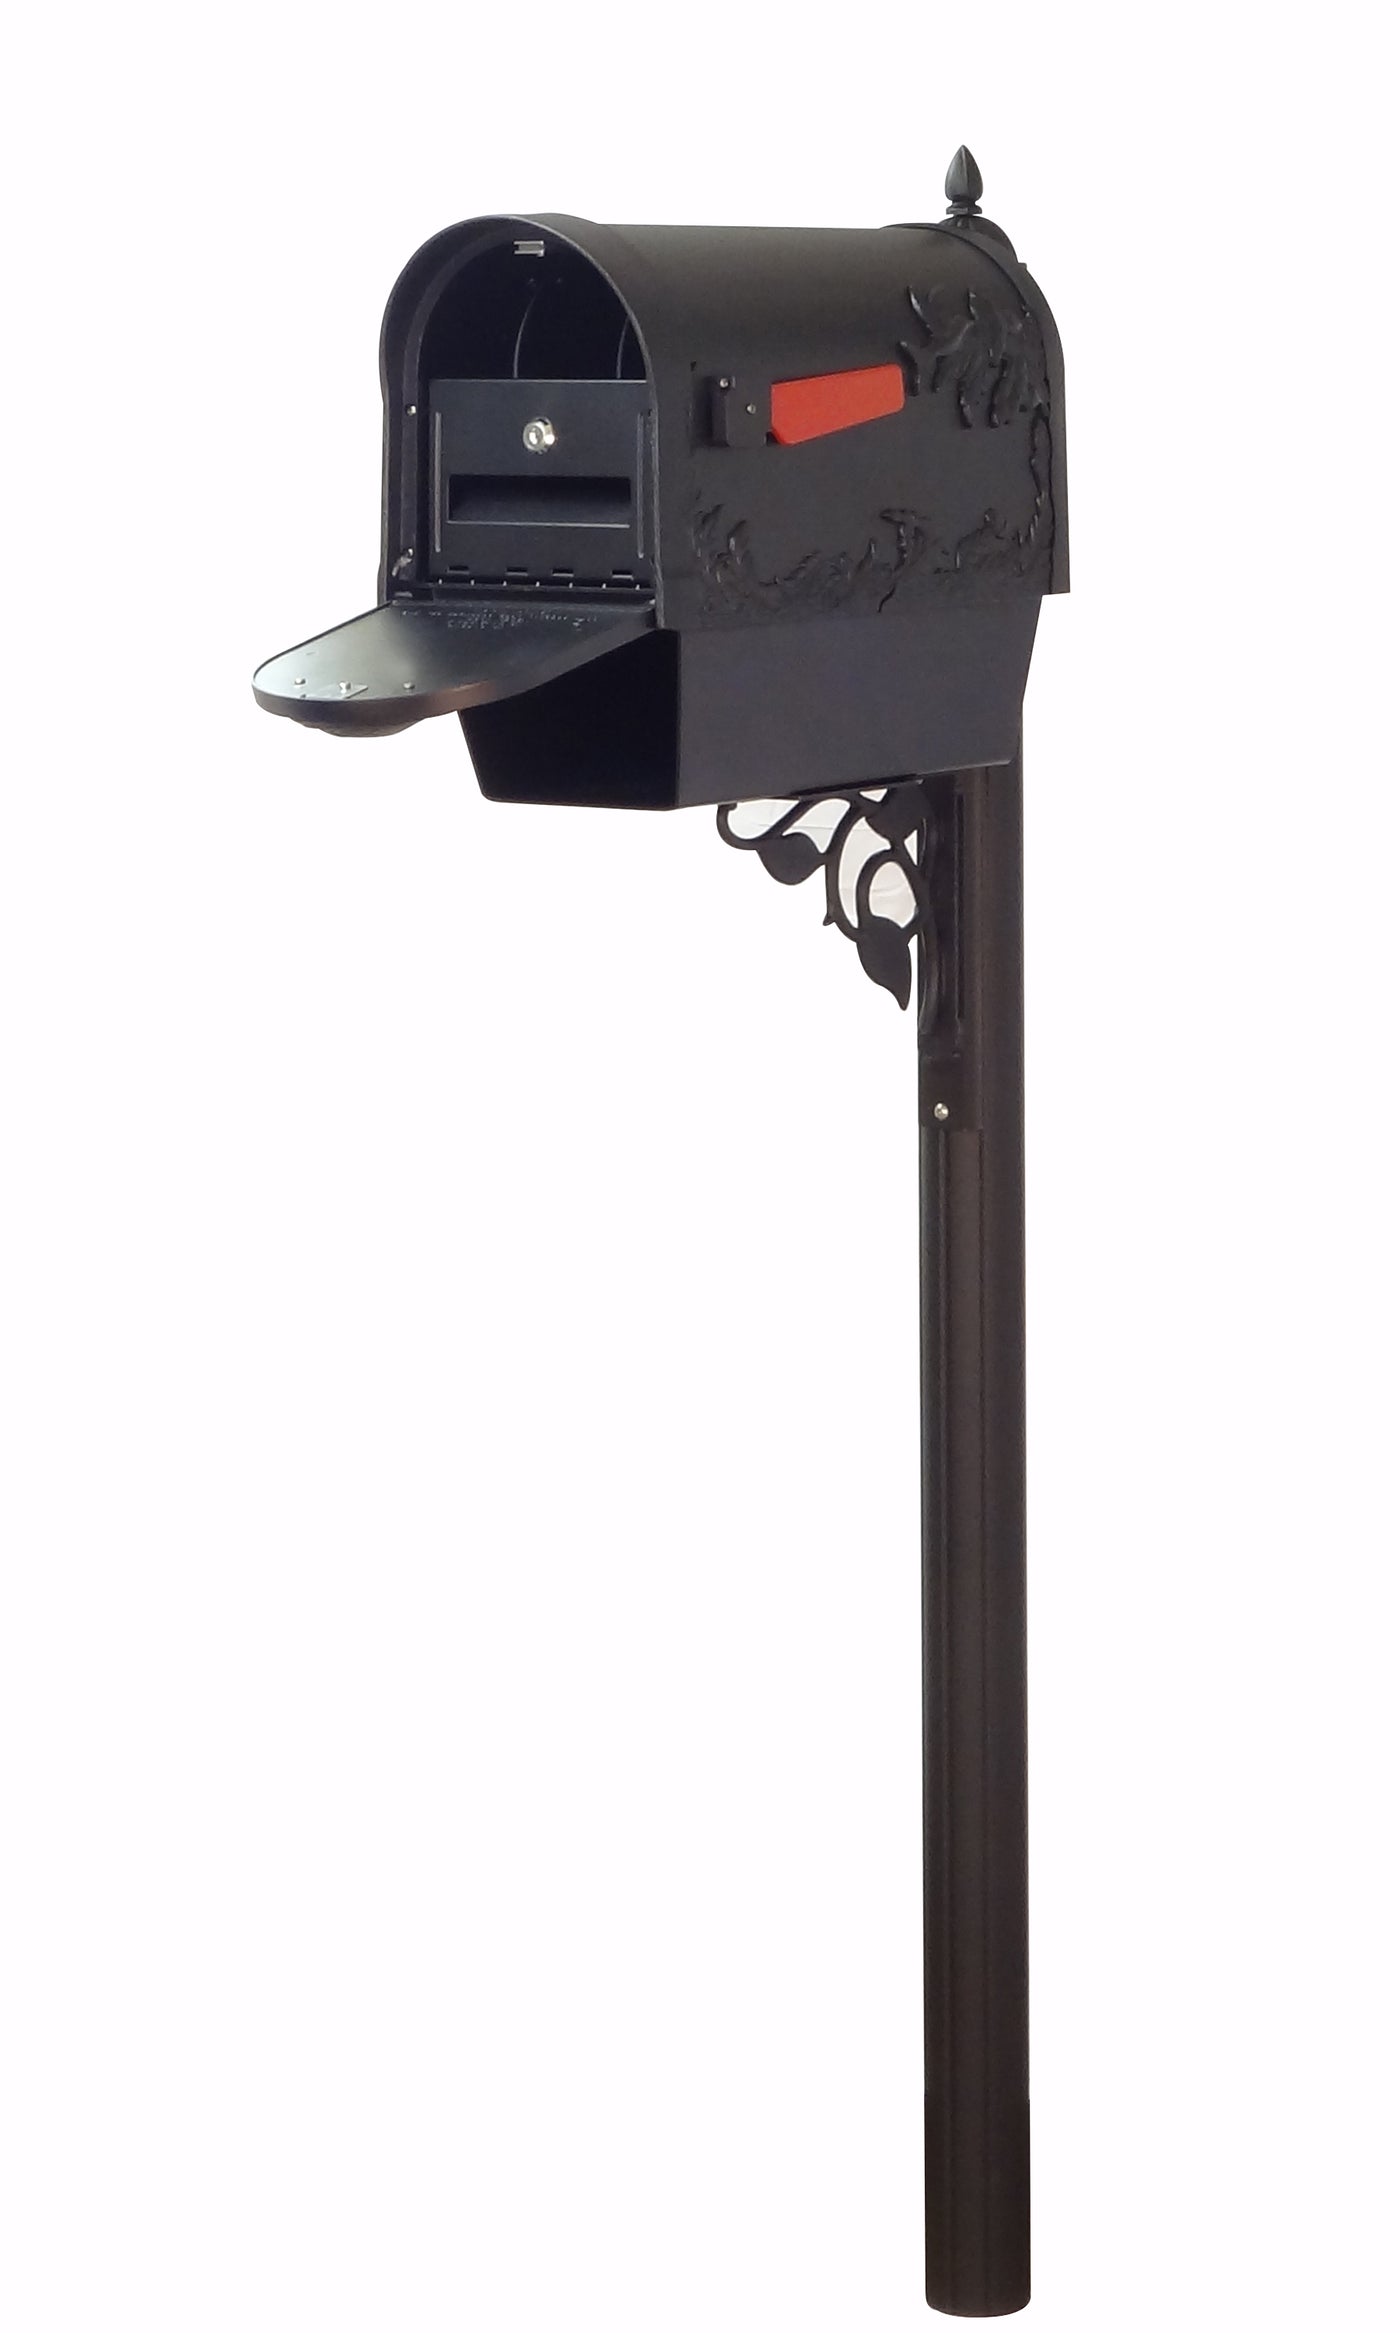 Hummingbird Curbside Mailbox with Newspaper Tube, Locking Insert and Albion Mailbox Post